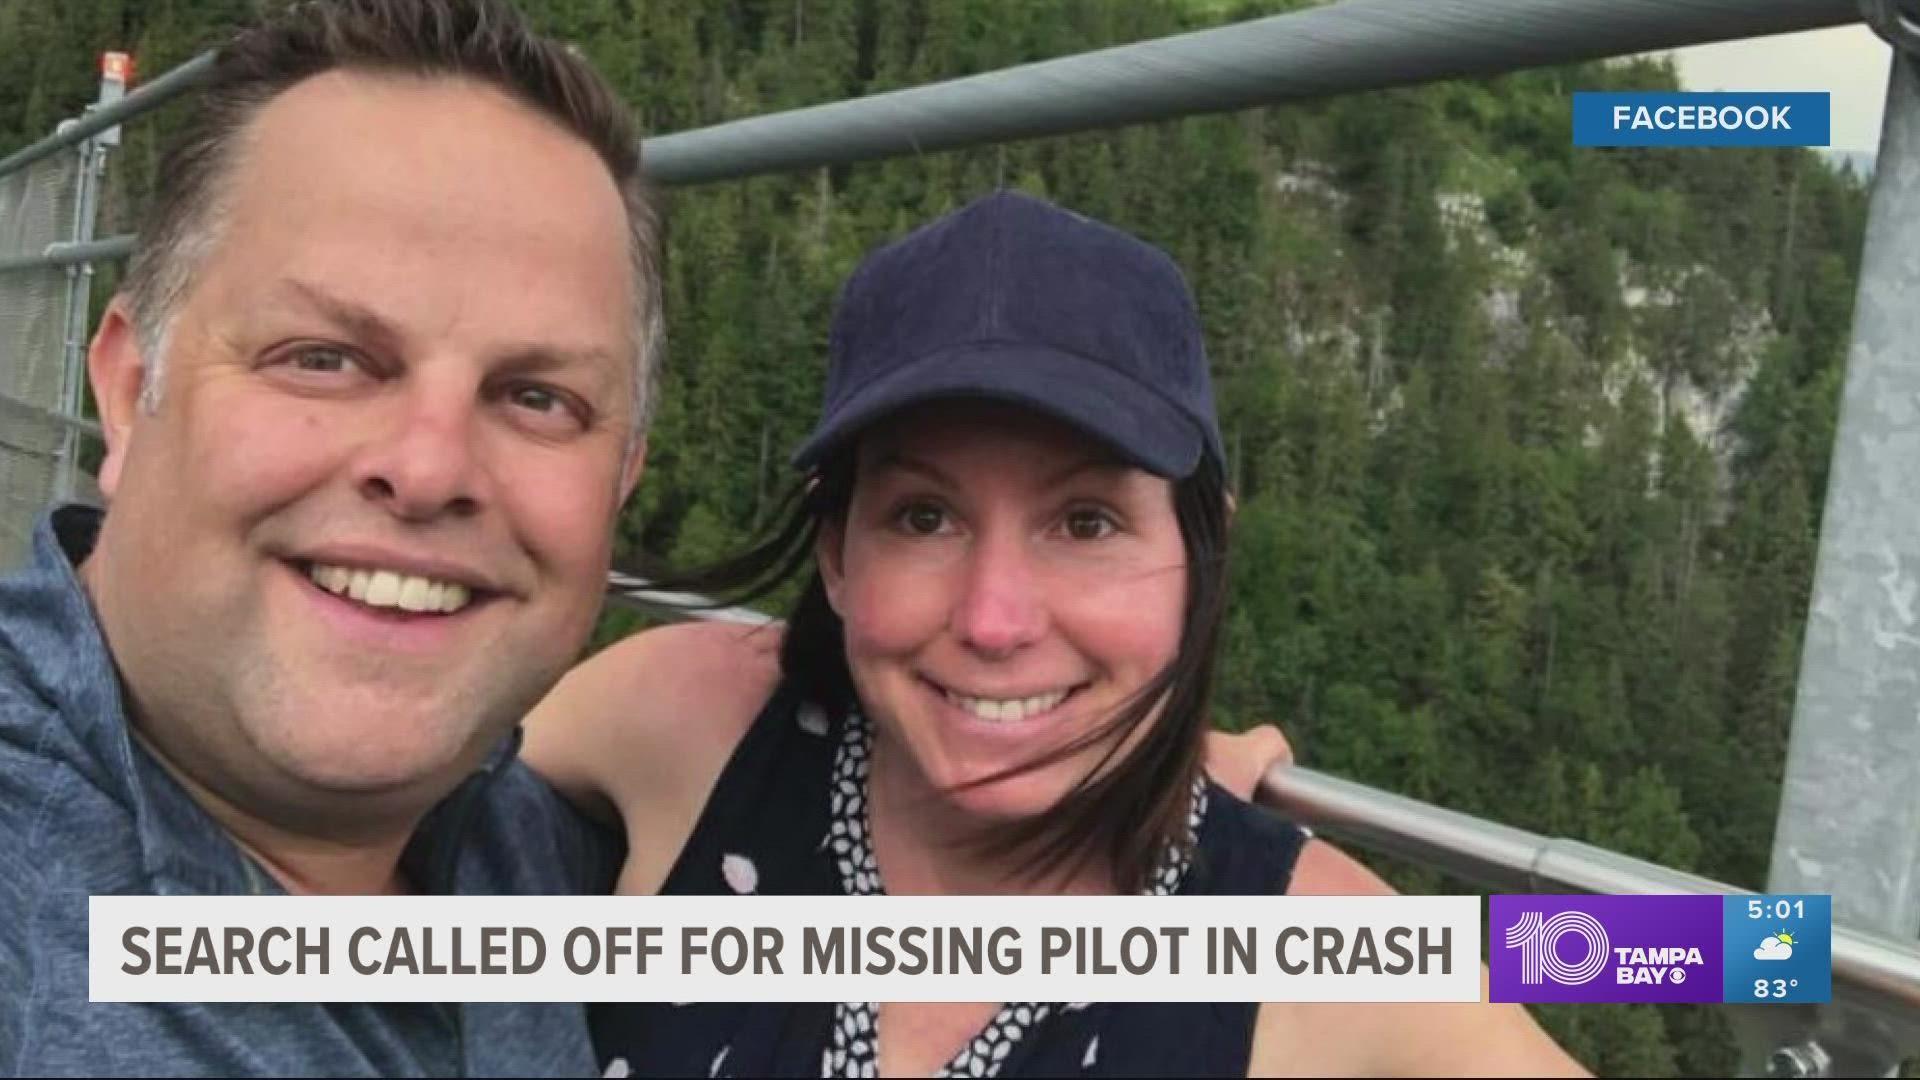 Christian Kath disappeared after the plane he, his wife and his 12-year-old daughter were on crashed after take-off. Both Misty and Lily Kath were found dead.